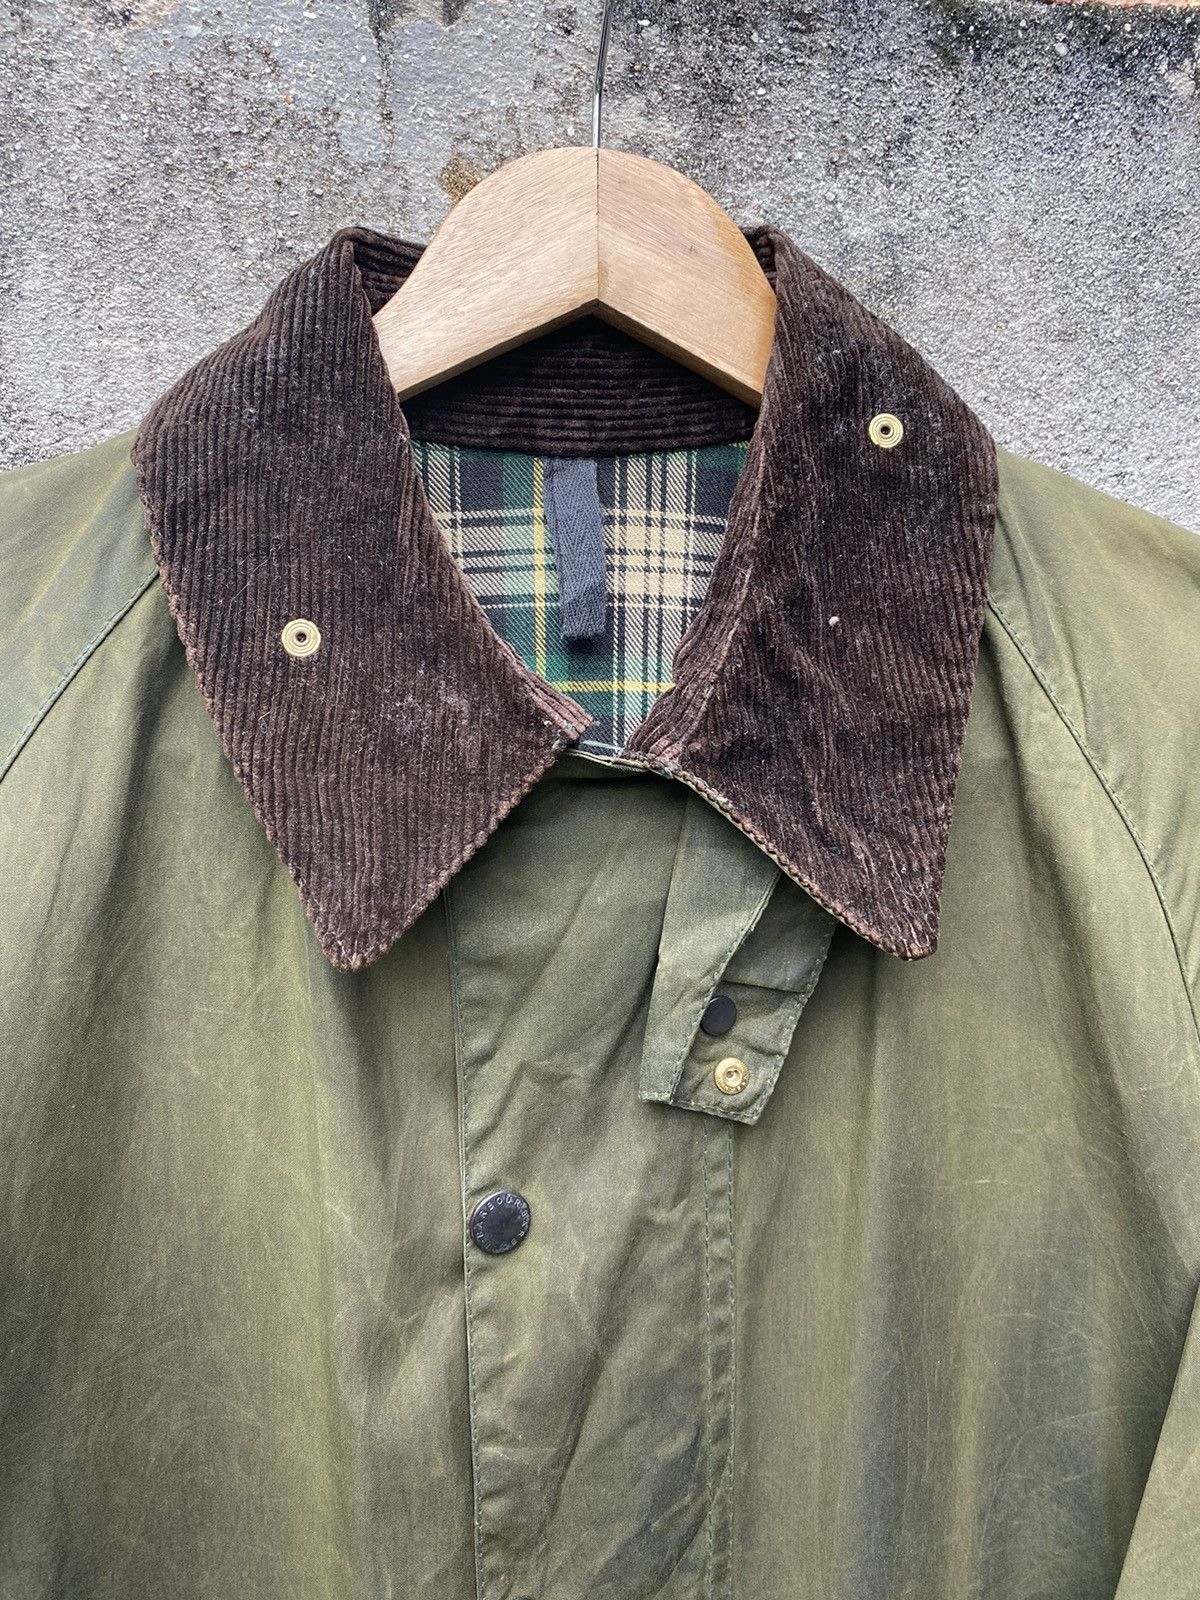 🏴󠁧󠁢󠁥󠁮󠁧󠁿 Barbour Beaufort Waxed Classic Jacket Made In England - 6